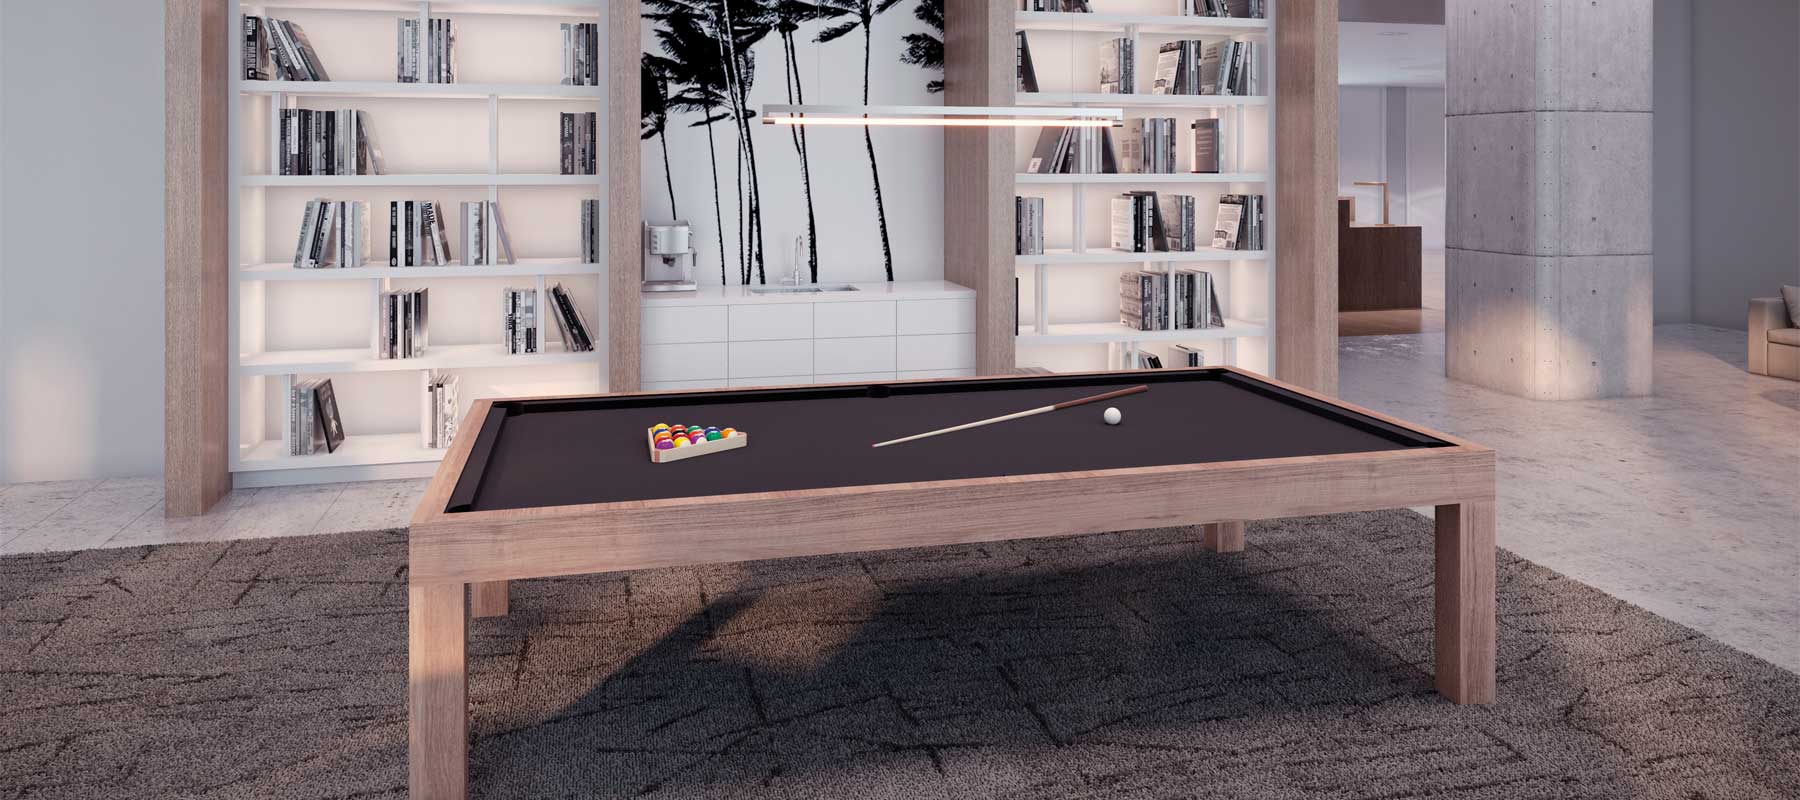 Pool table rendering of Sixty-Five Broadway Condos.